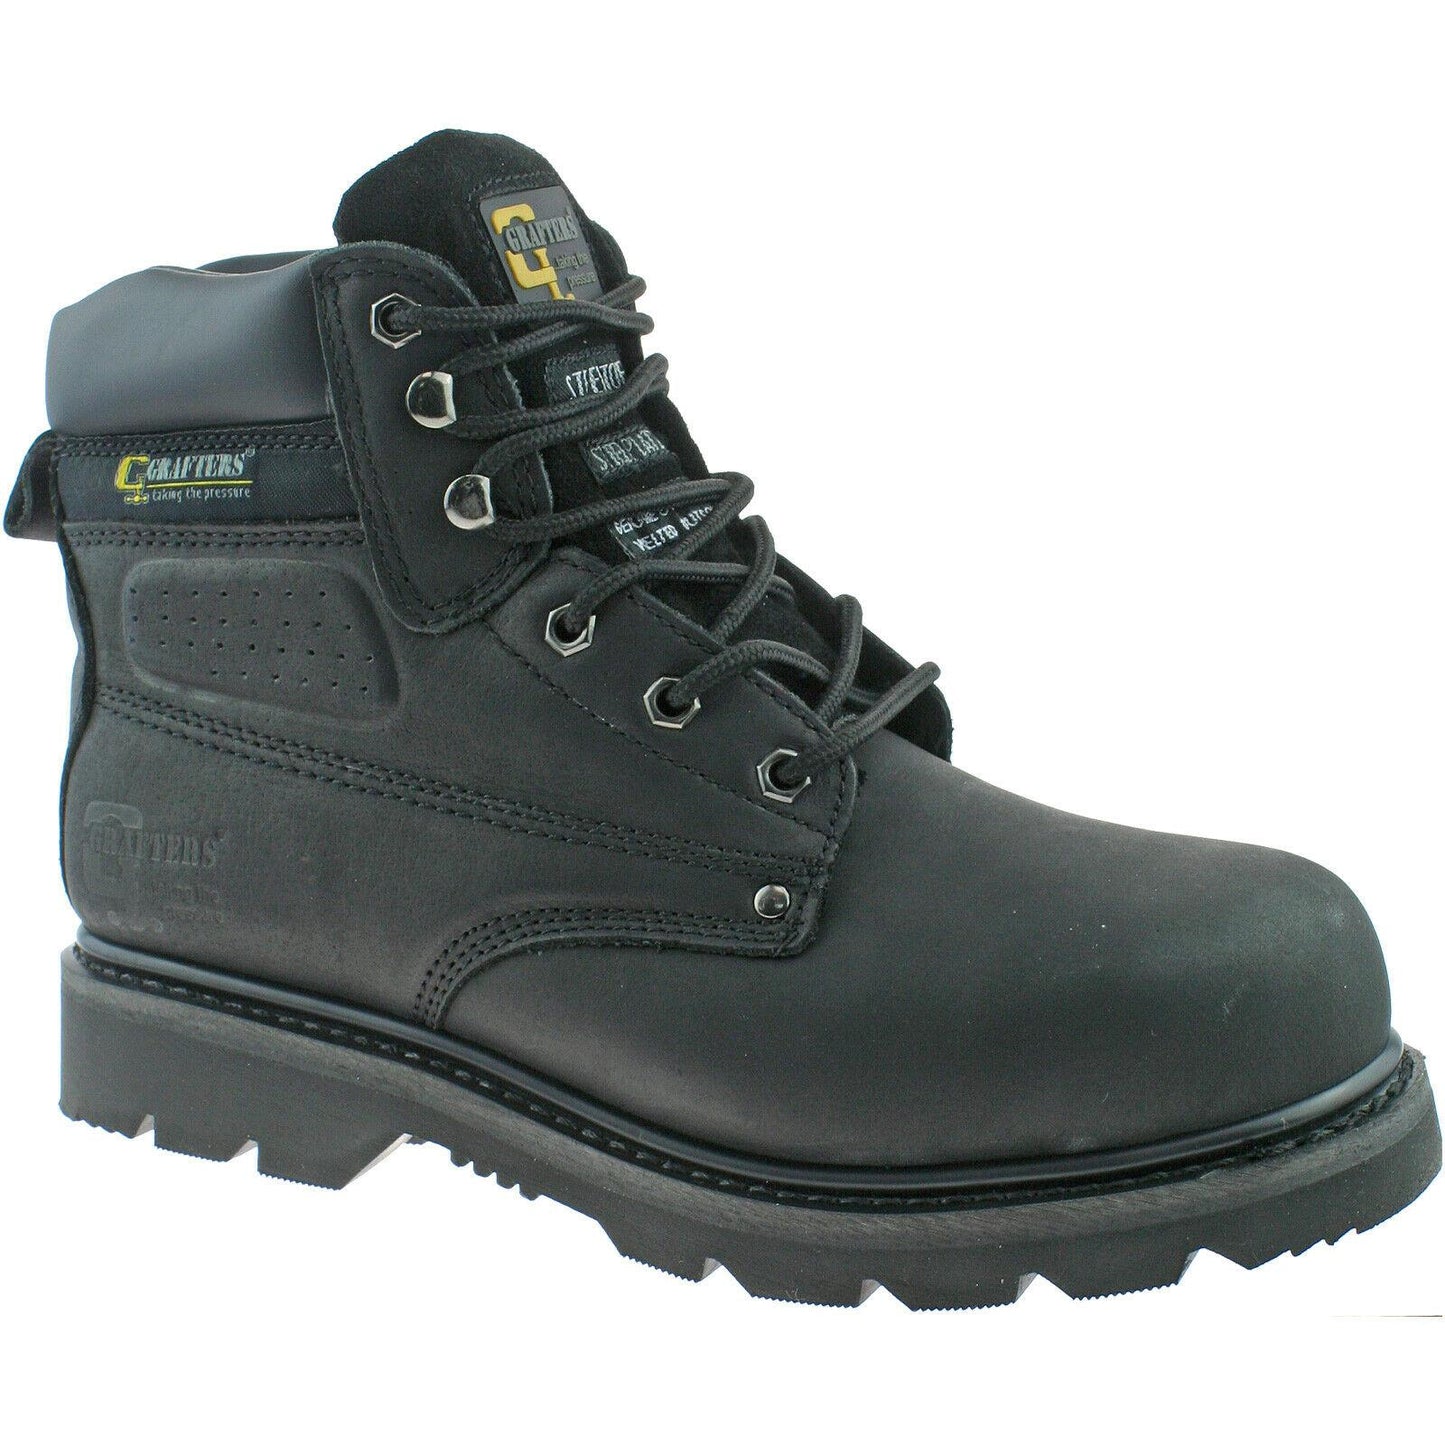 Grafters Steel Toe Safety Work Boots Black Brown Honey M538